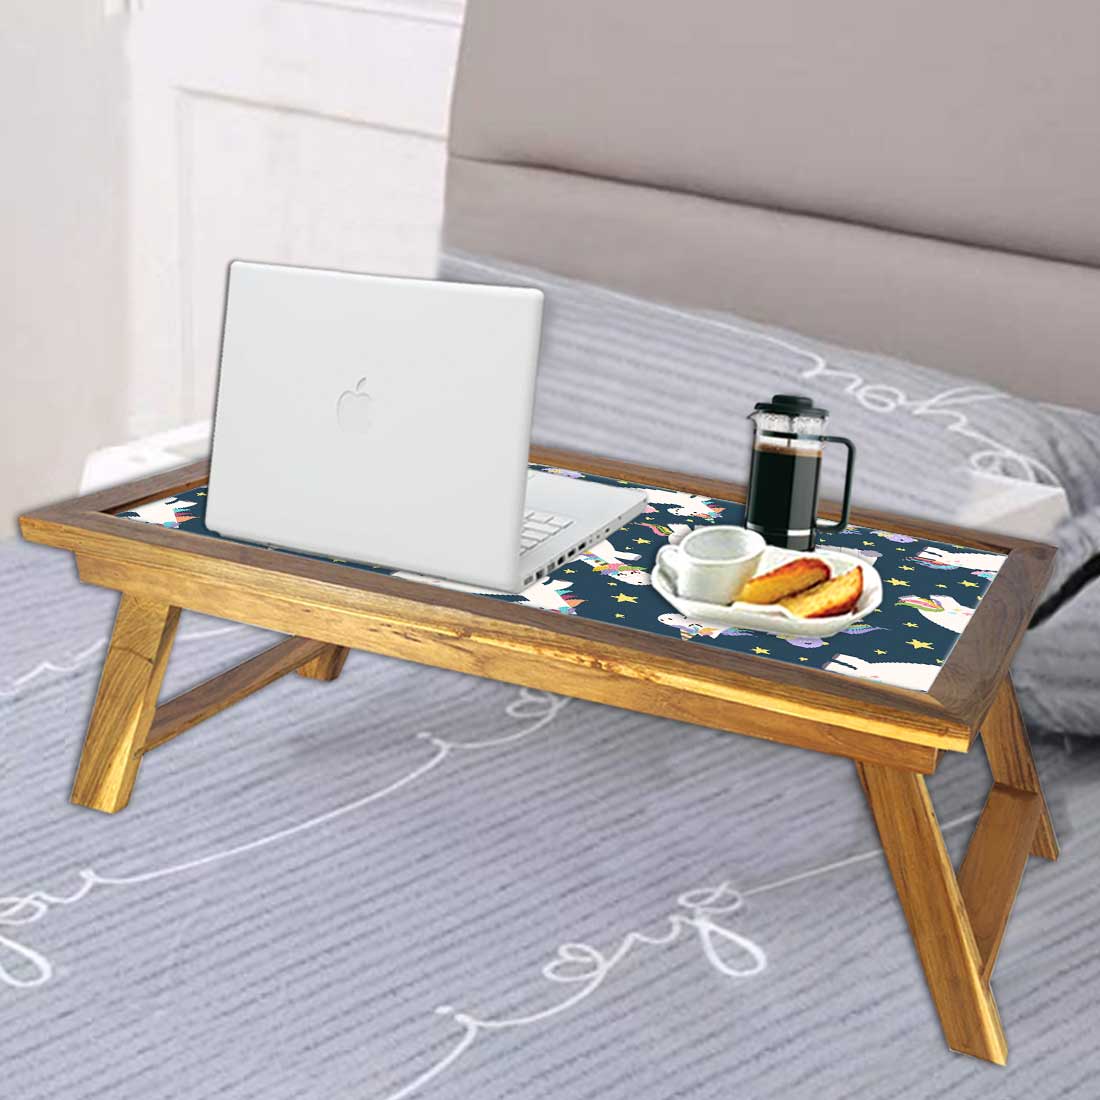 Folding Wooden Laptop Table for Home Bed Breakfast Tray - White Unicorn Nutcase